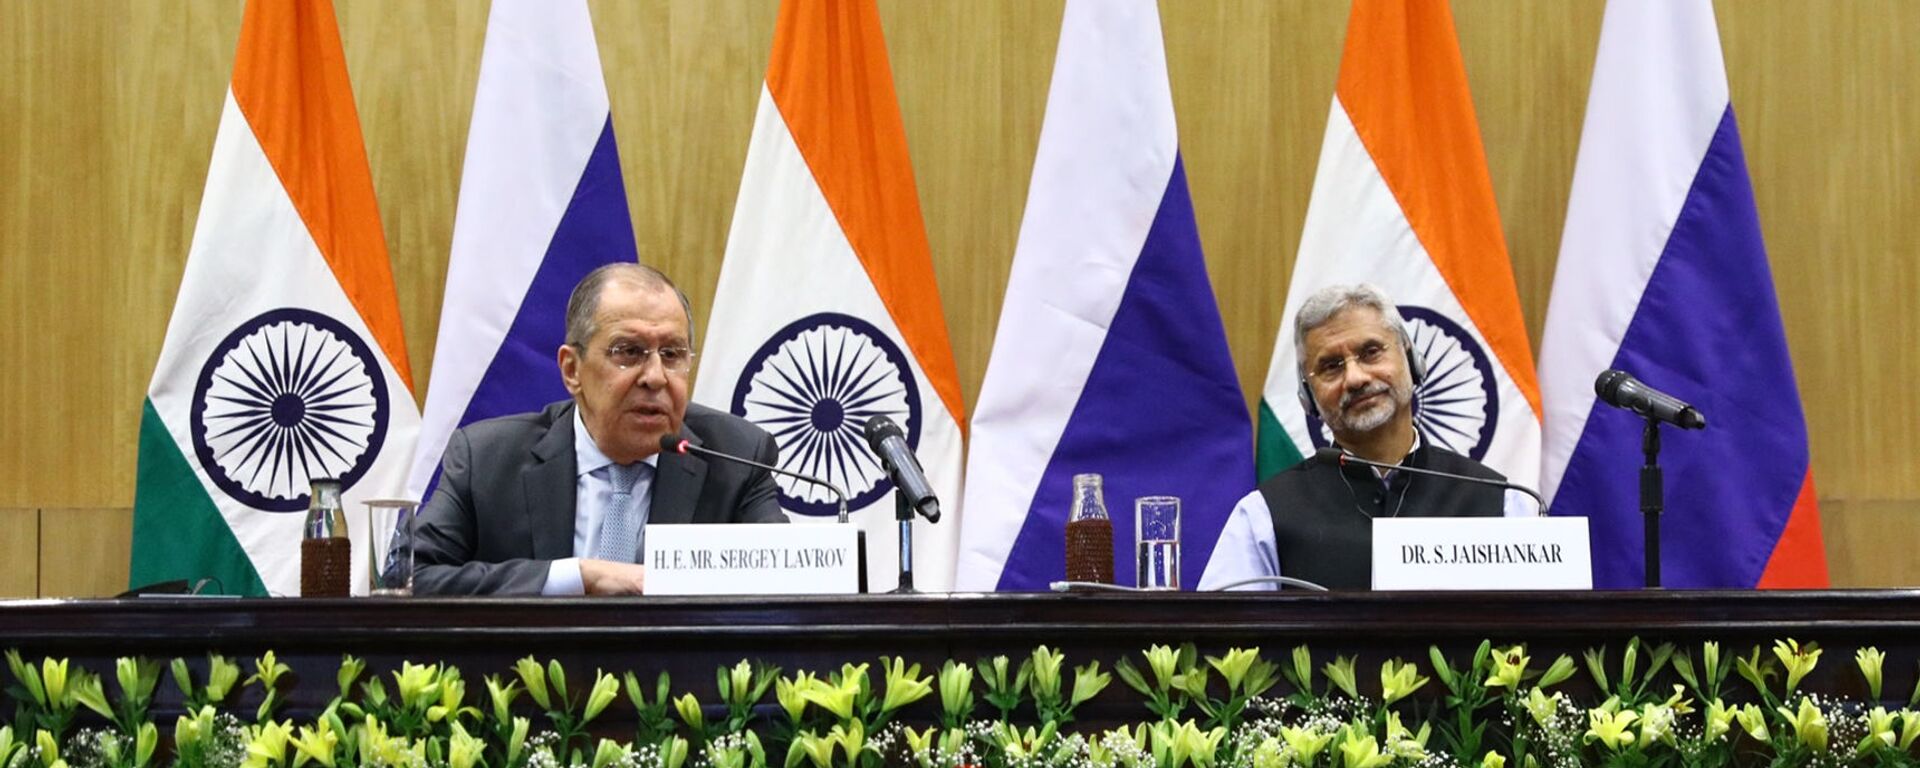  Russian Foreign Minister Sergei Lavrov, left, and his Indian counterpart Subrahmanyam Jaishankar attend a joint news conference following their meeting, in New Delhi, India - Sputnik International, 1920, 06.04.2021